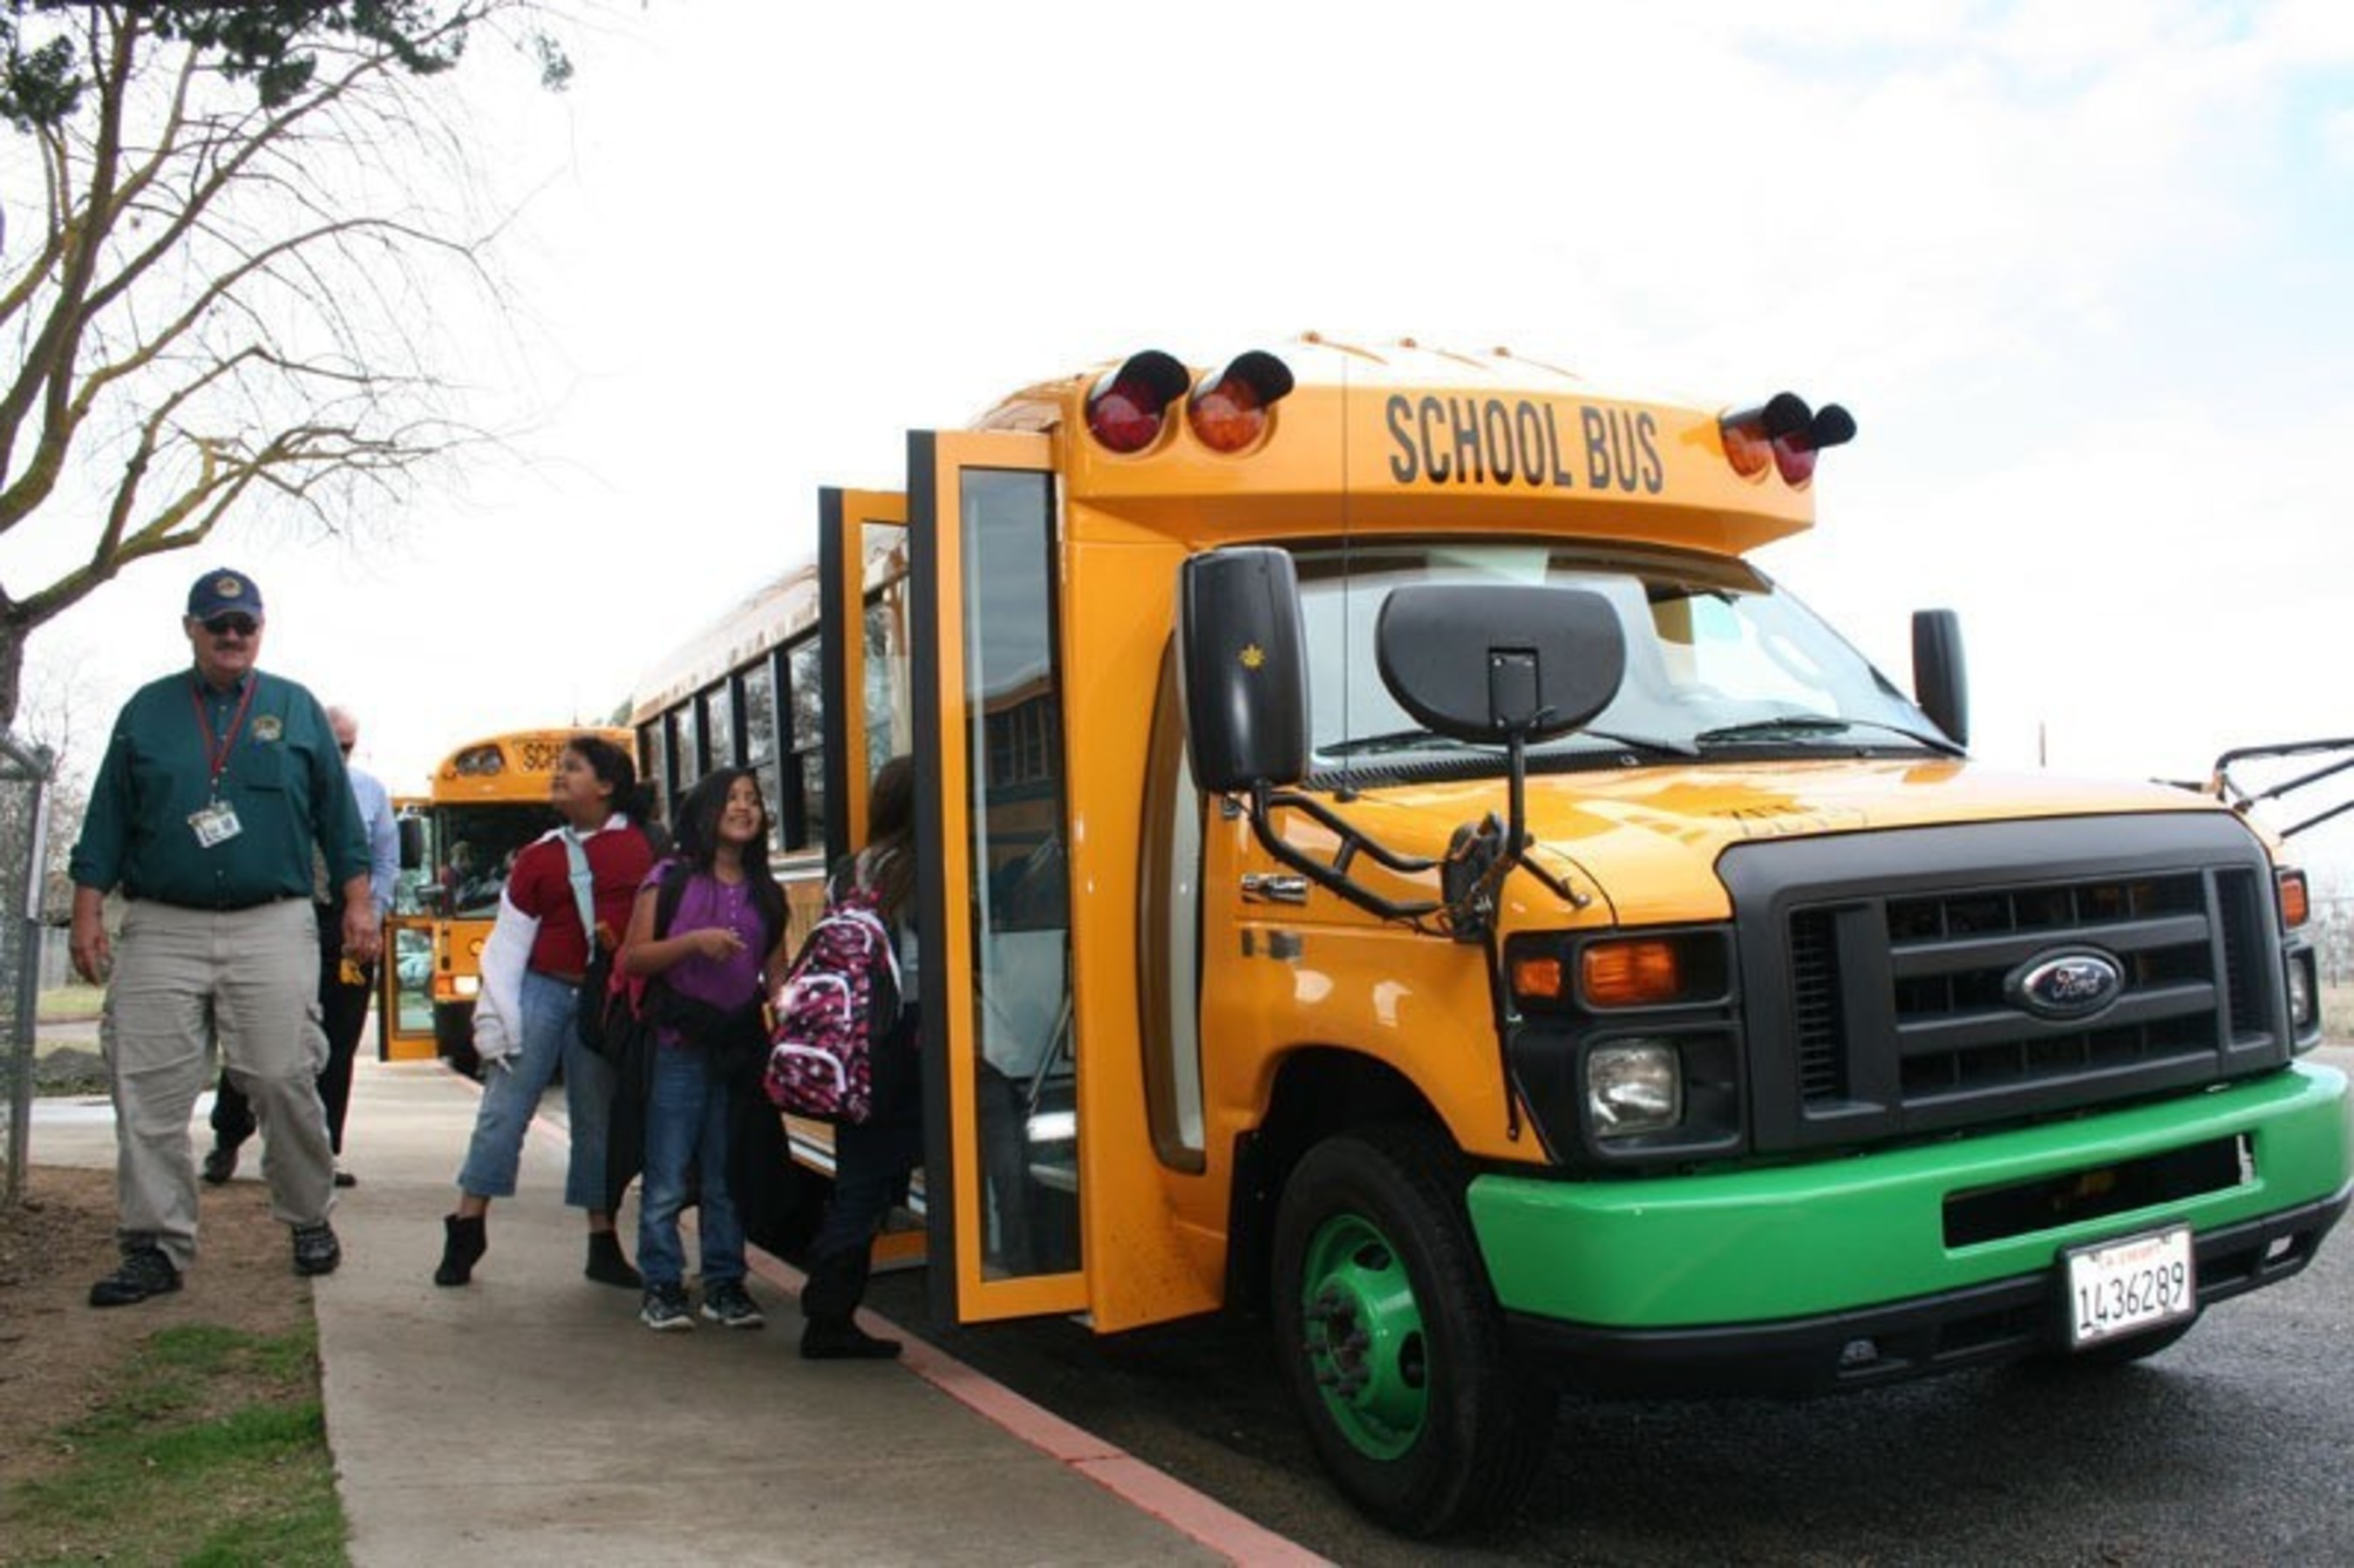 The Motiv powered all-electric bus is expected to save Kings Canyon Unified School District over $10,000 a year in fuel and maintenance costs, while also eliminating student exposure to particulate air emissions.